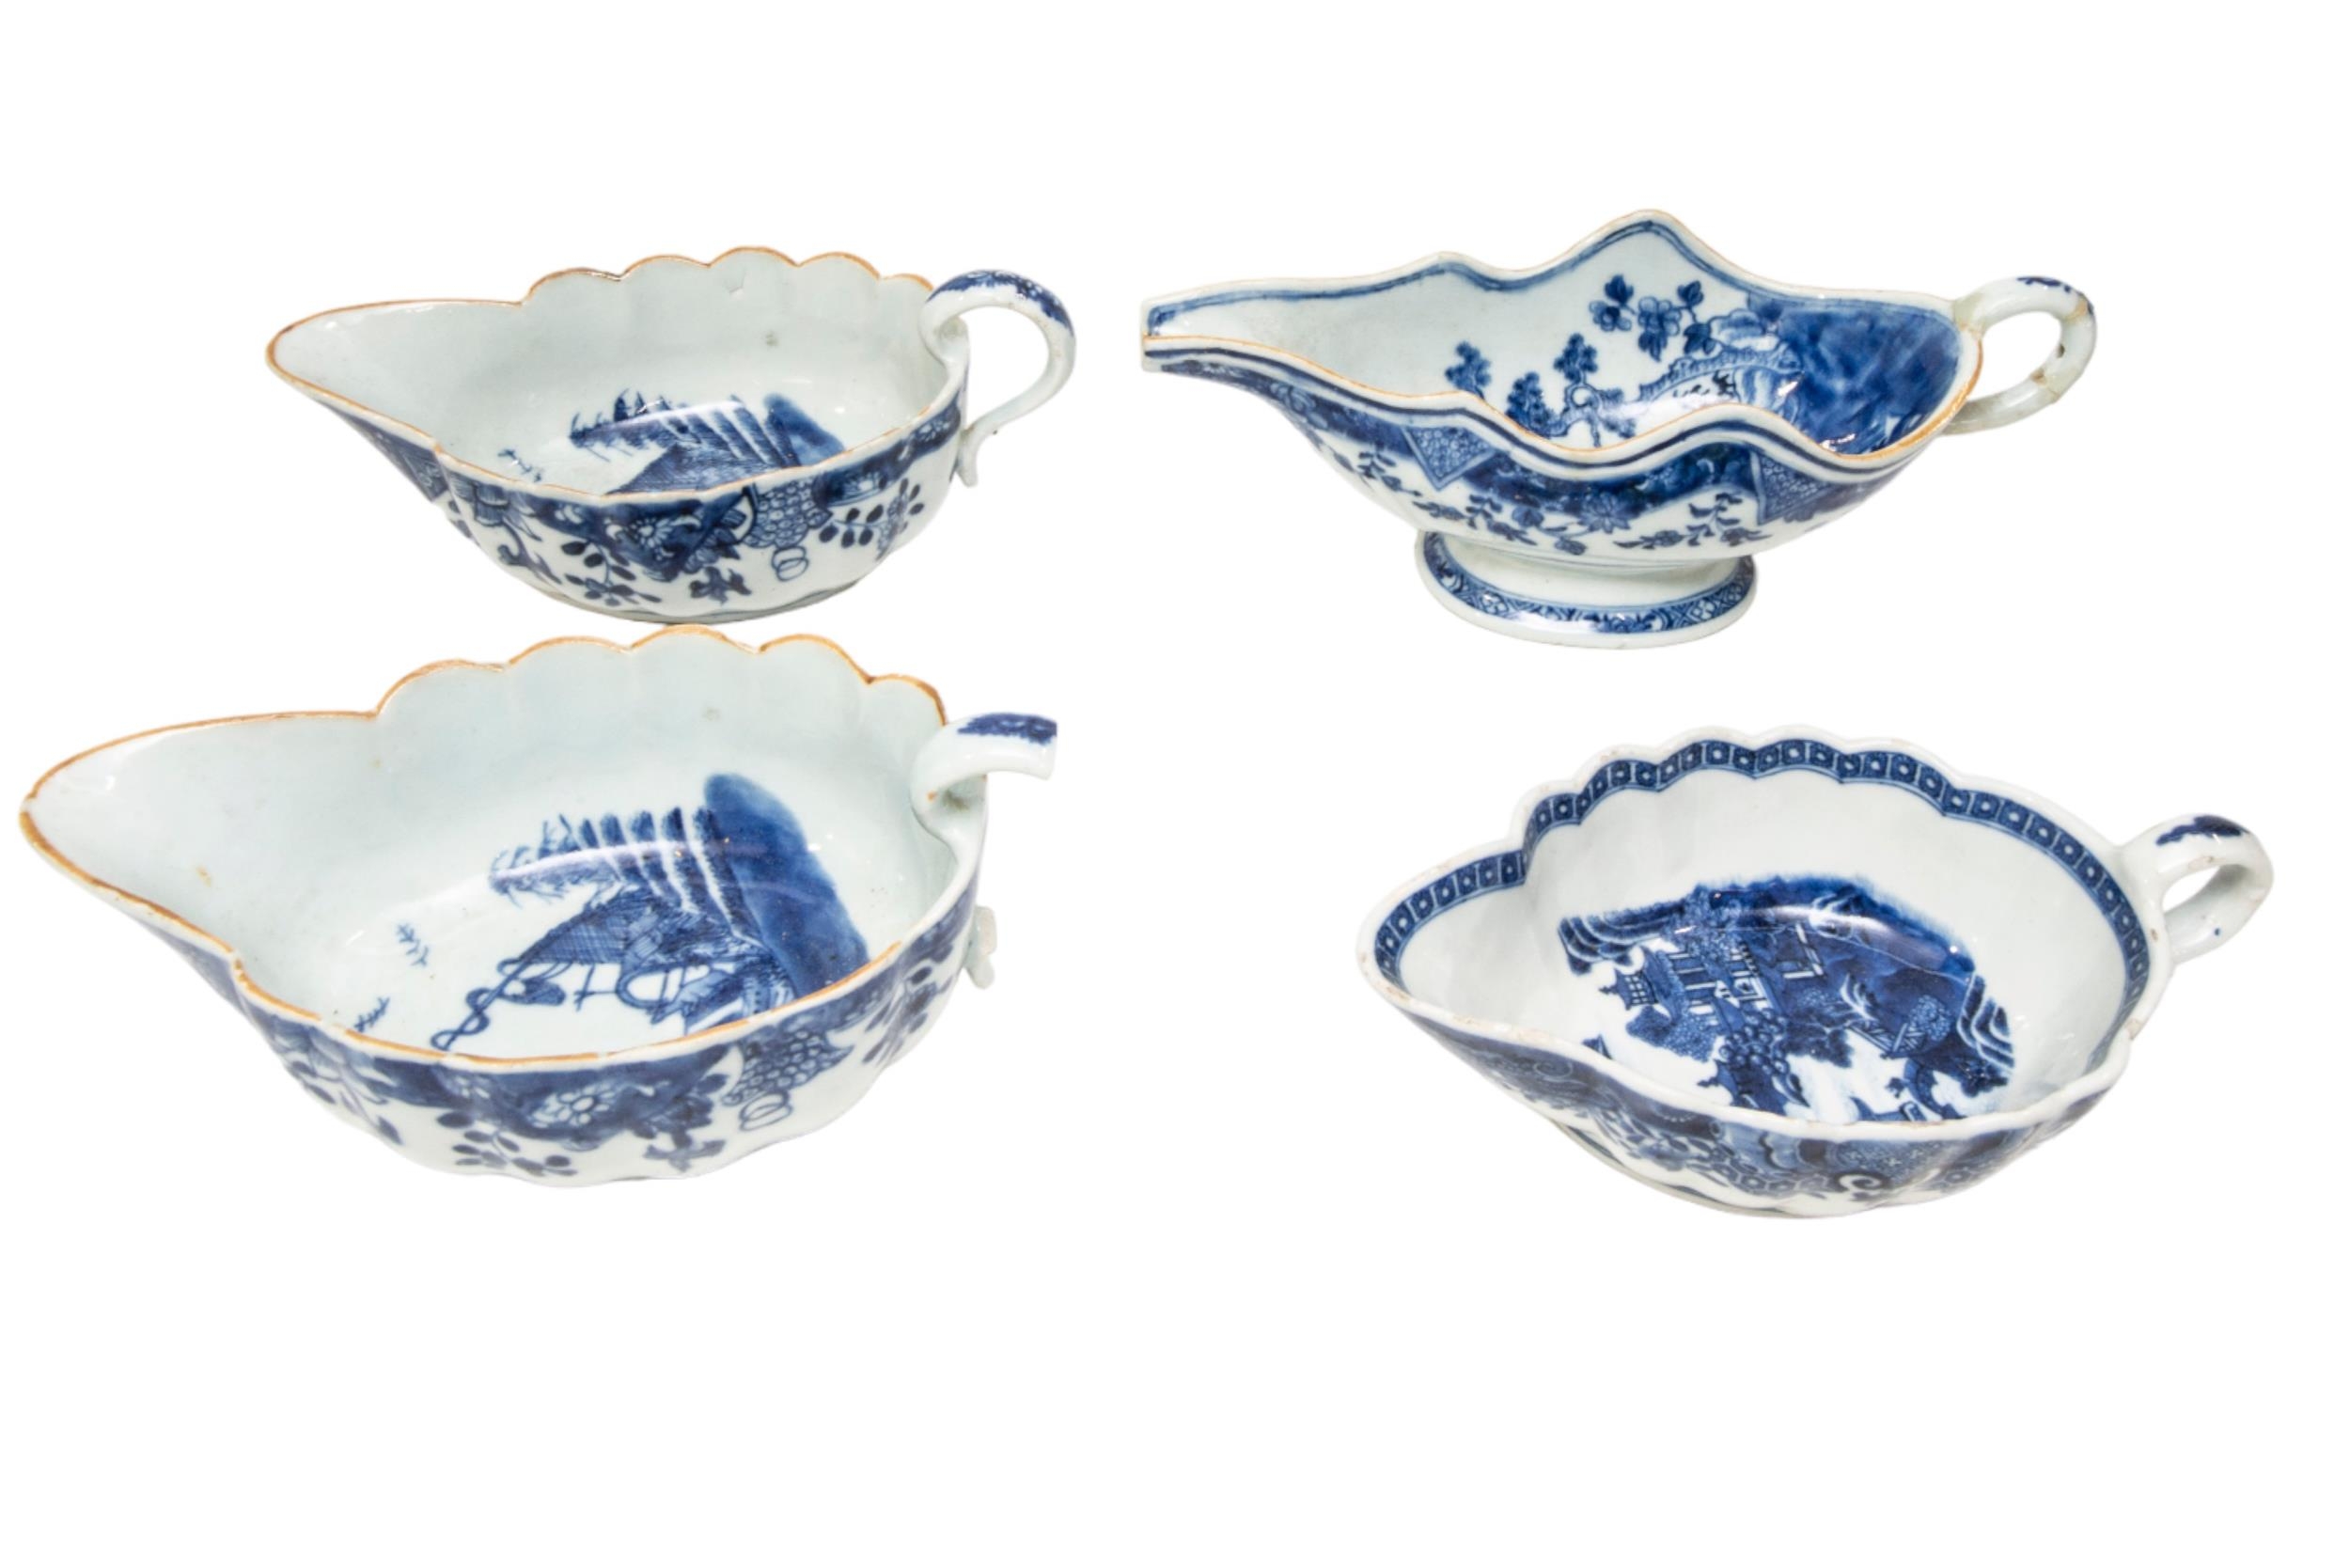 A VARIED COLLECTION OF CHINESE EXPORT BLUE & WHITE PORCELAIN WARE, 18TH/19TH CENTURY, the lot - Image 12 of 13